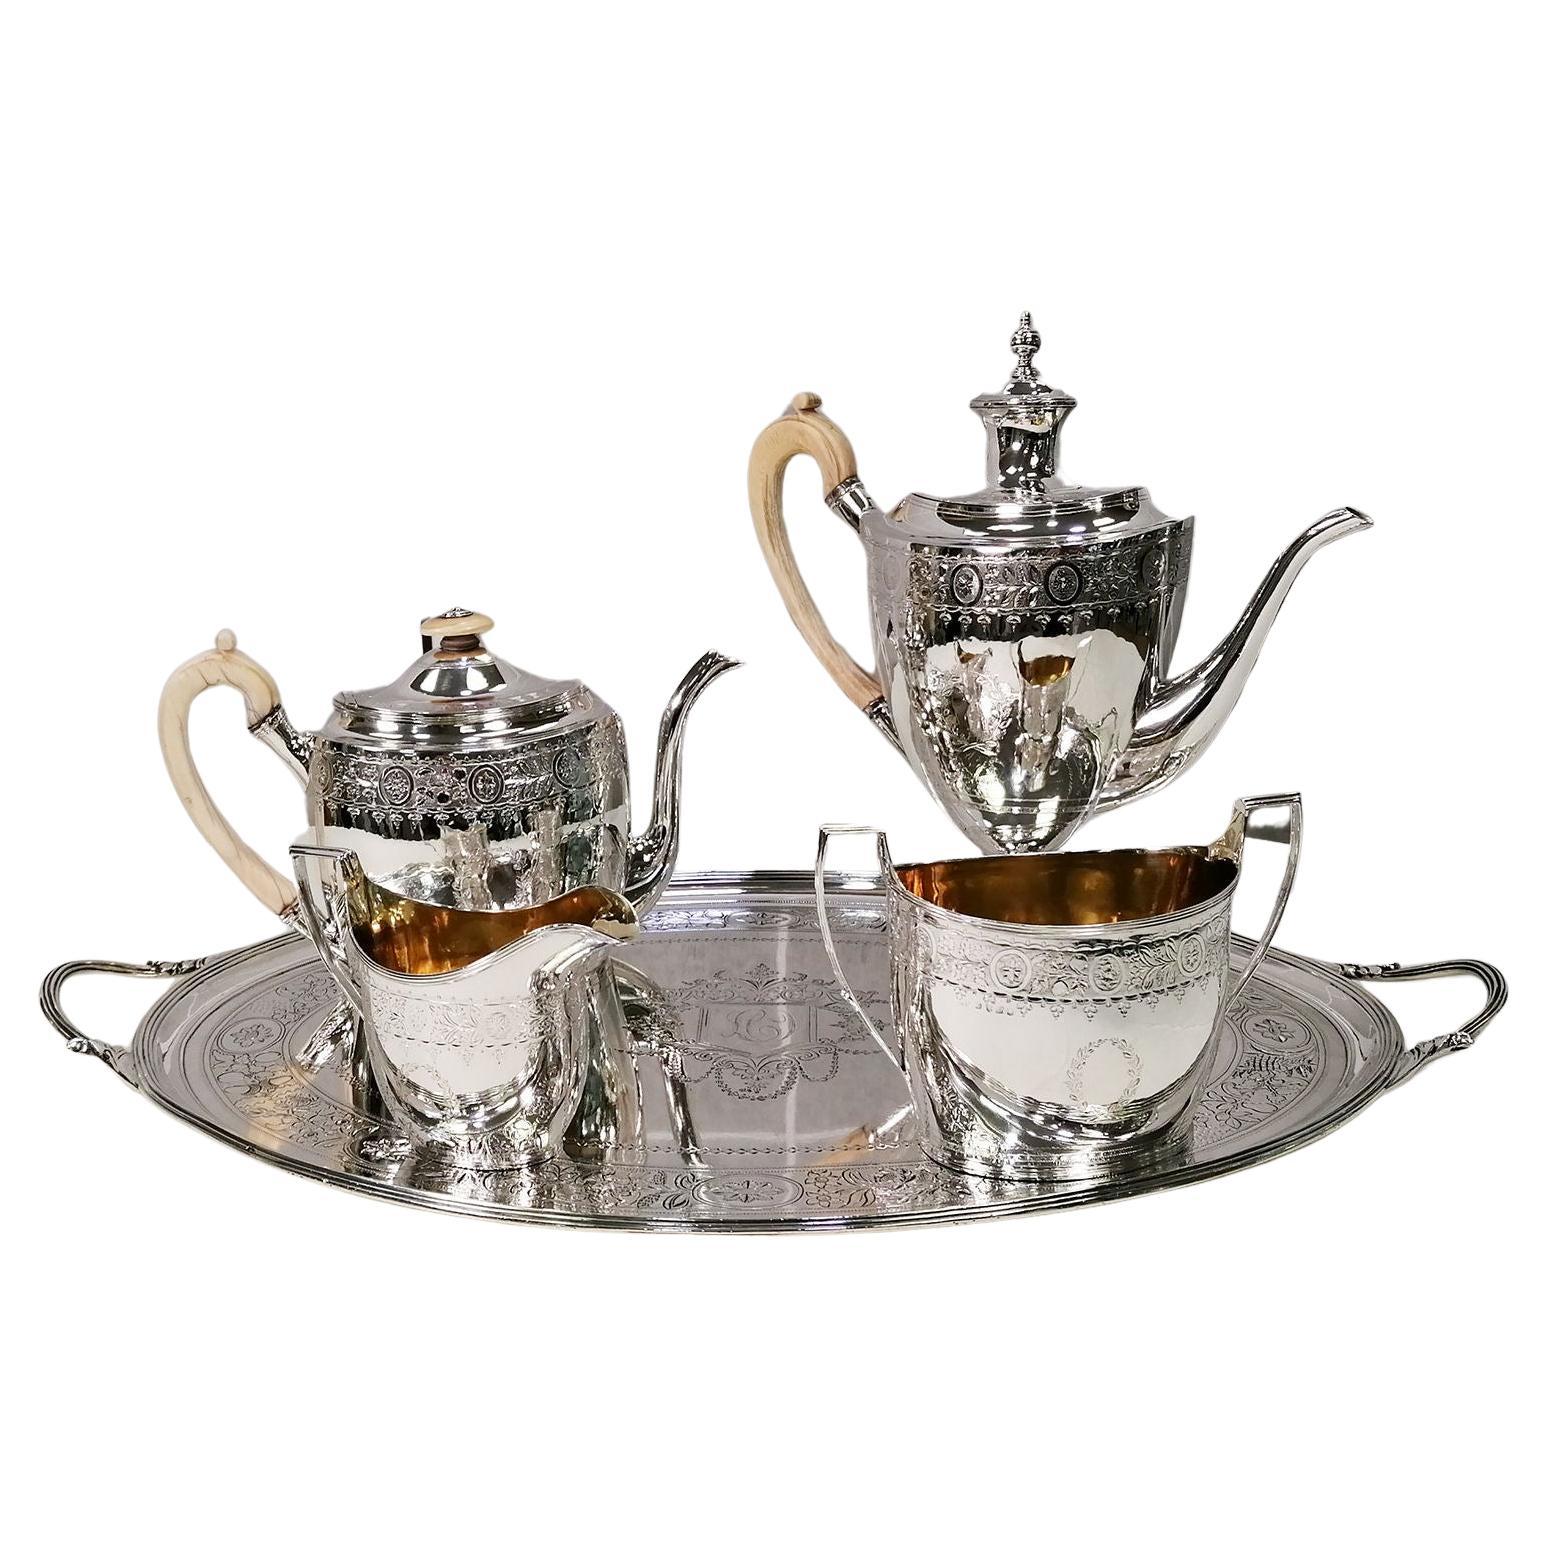 Antique George III Sterling Silver Tea-Coffeeset ivory Handles & Tray 1798-1800 For Sale